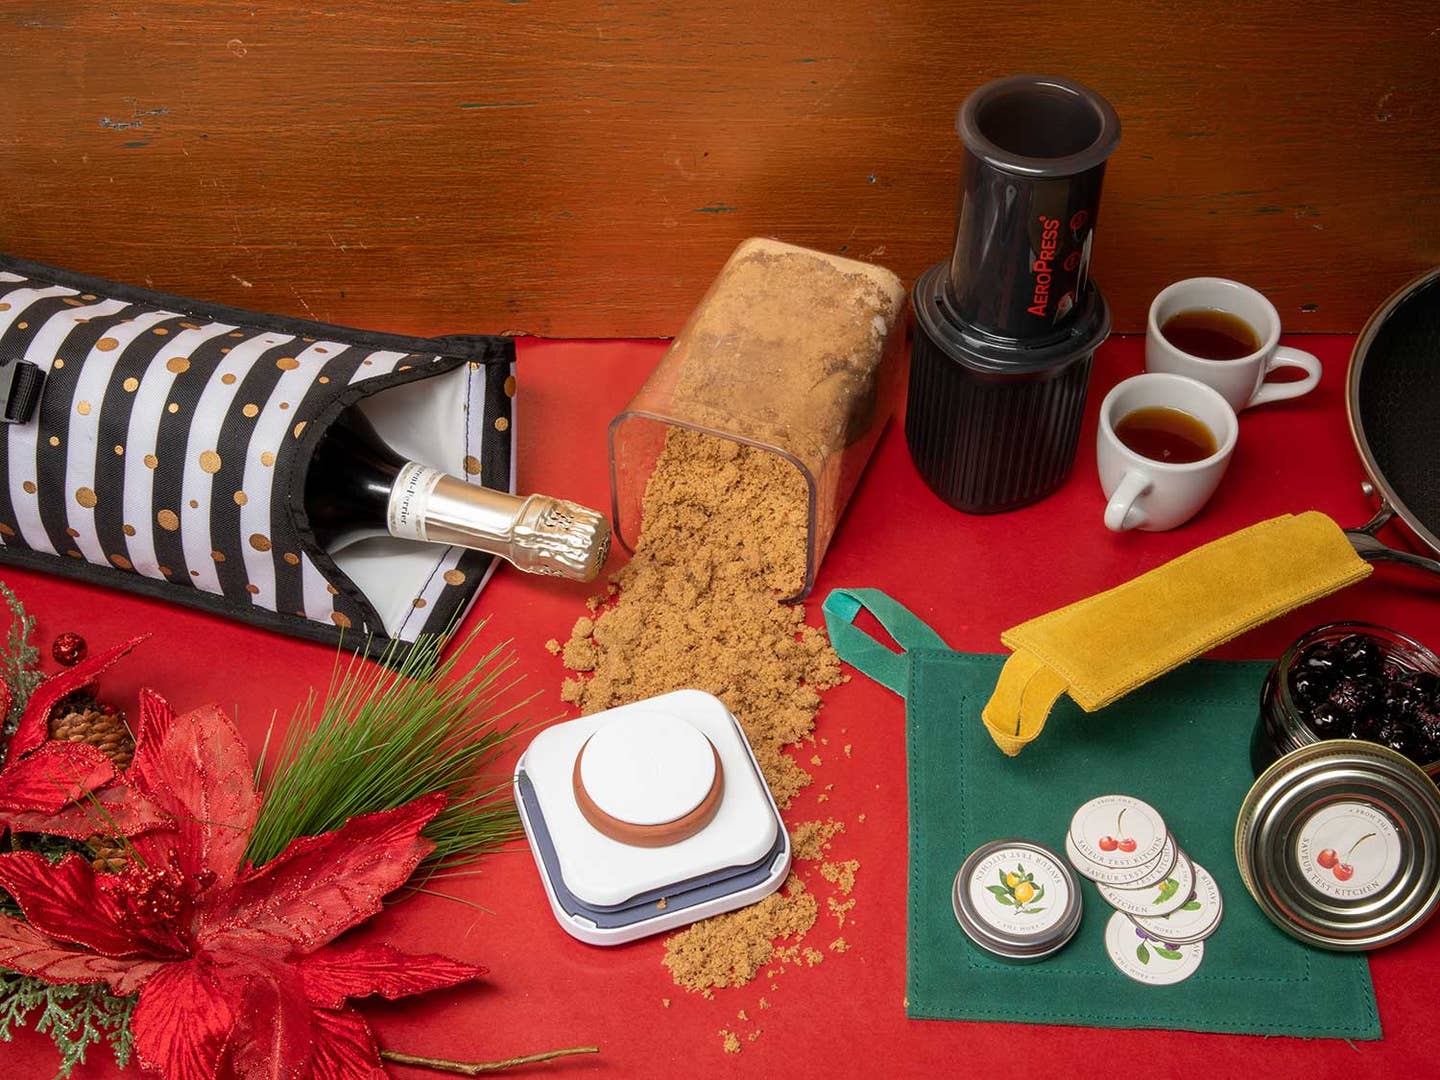 The 2019 SAVEUR Stocking Stuffers Gift Guide